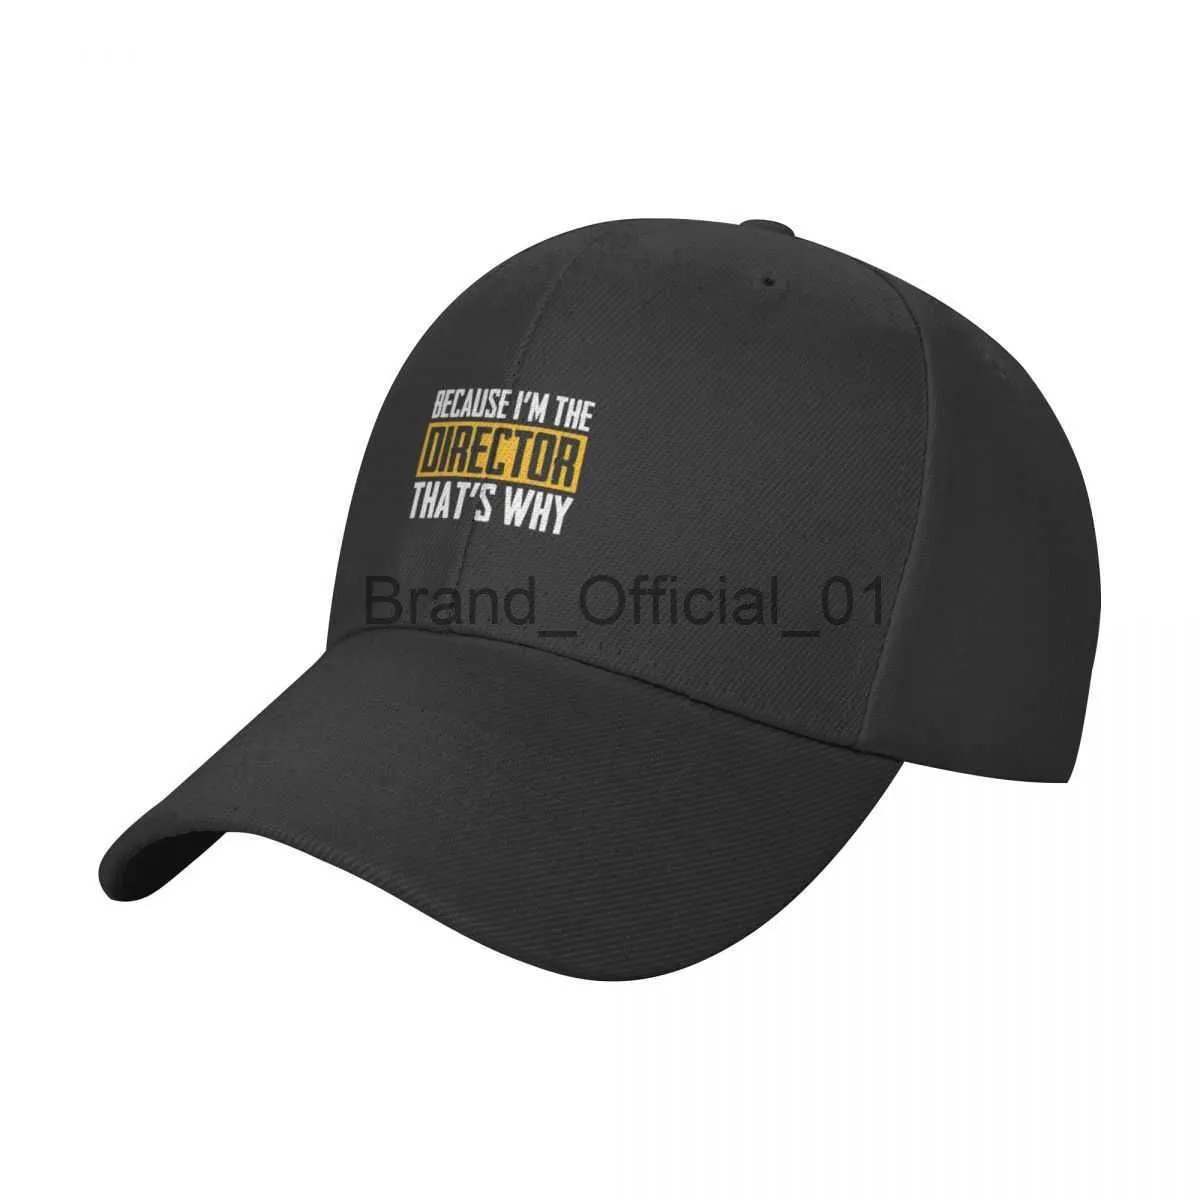 Director Upside Down Baseball Cap For Men And Women Ideal For